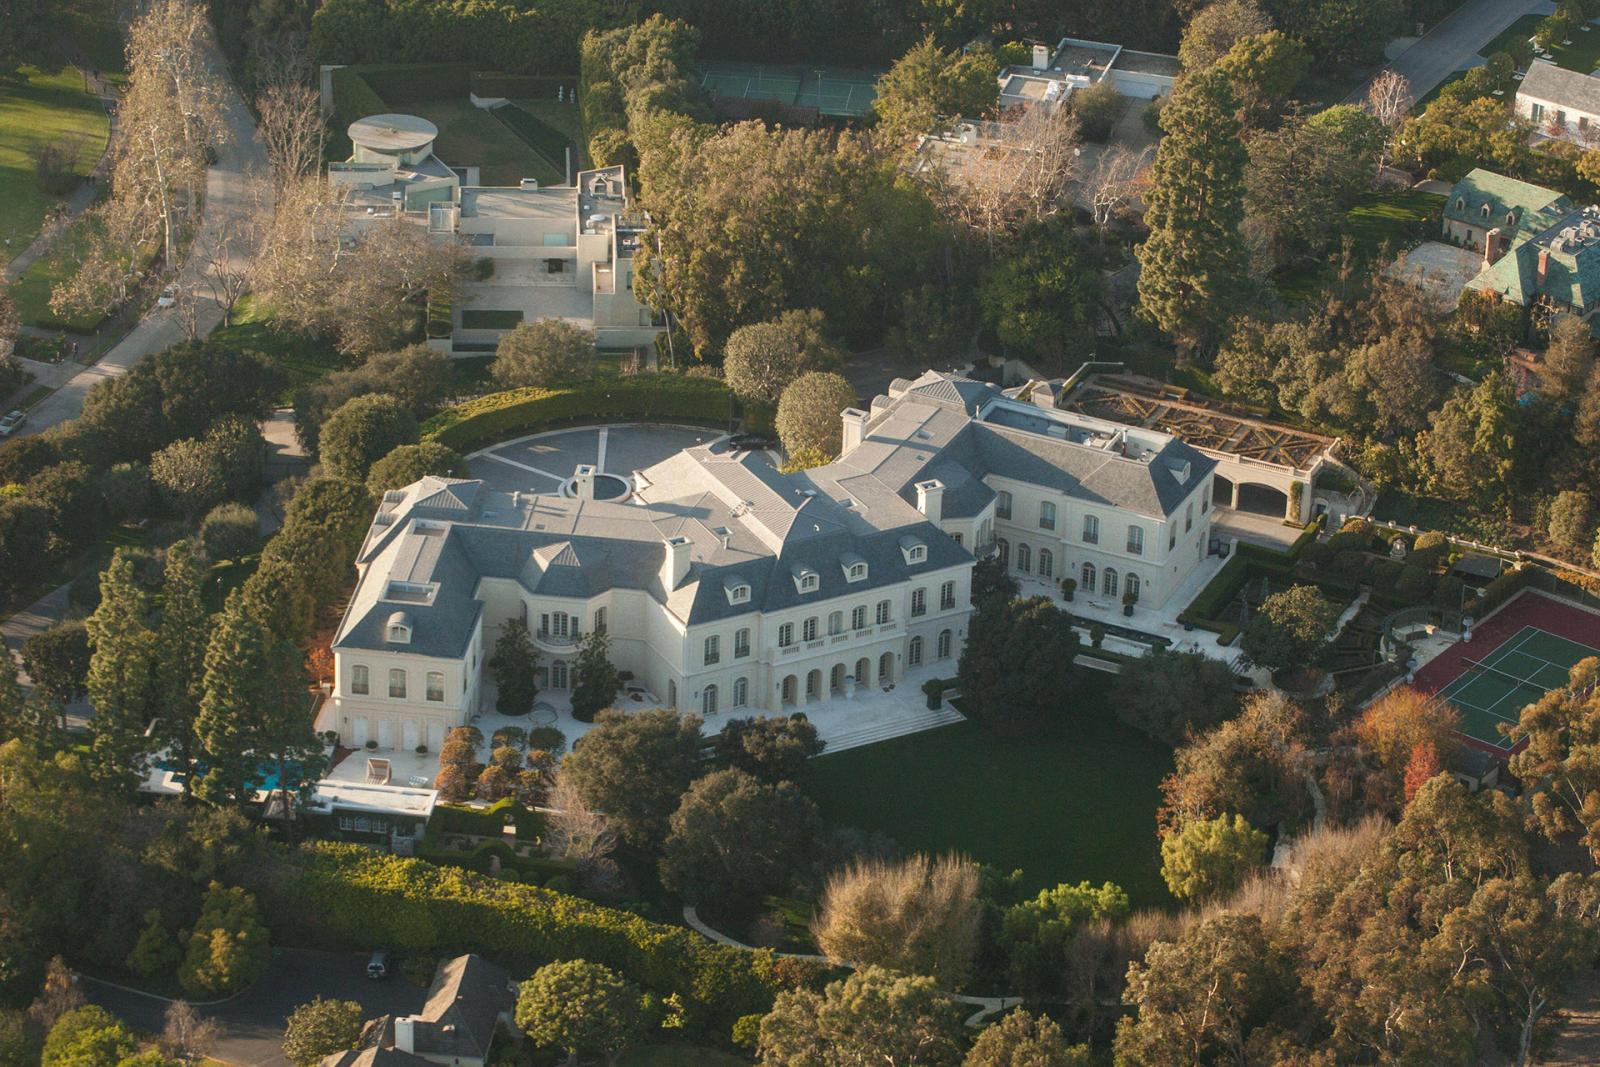 The Top 10 Outrageously Priced Celebrity Homes of 2023 - image 4